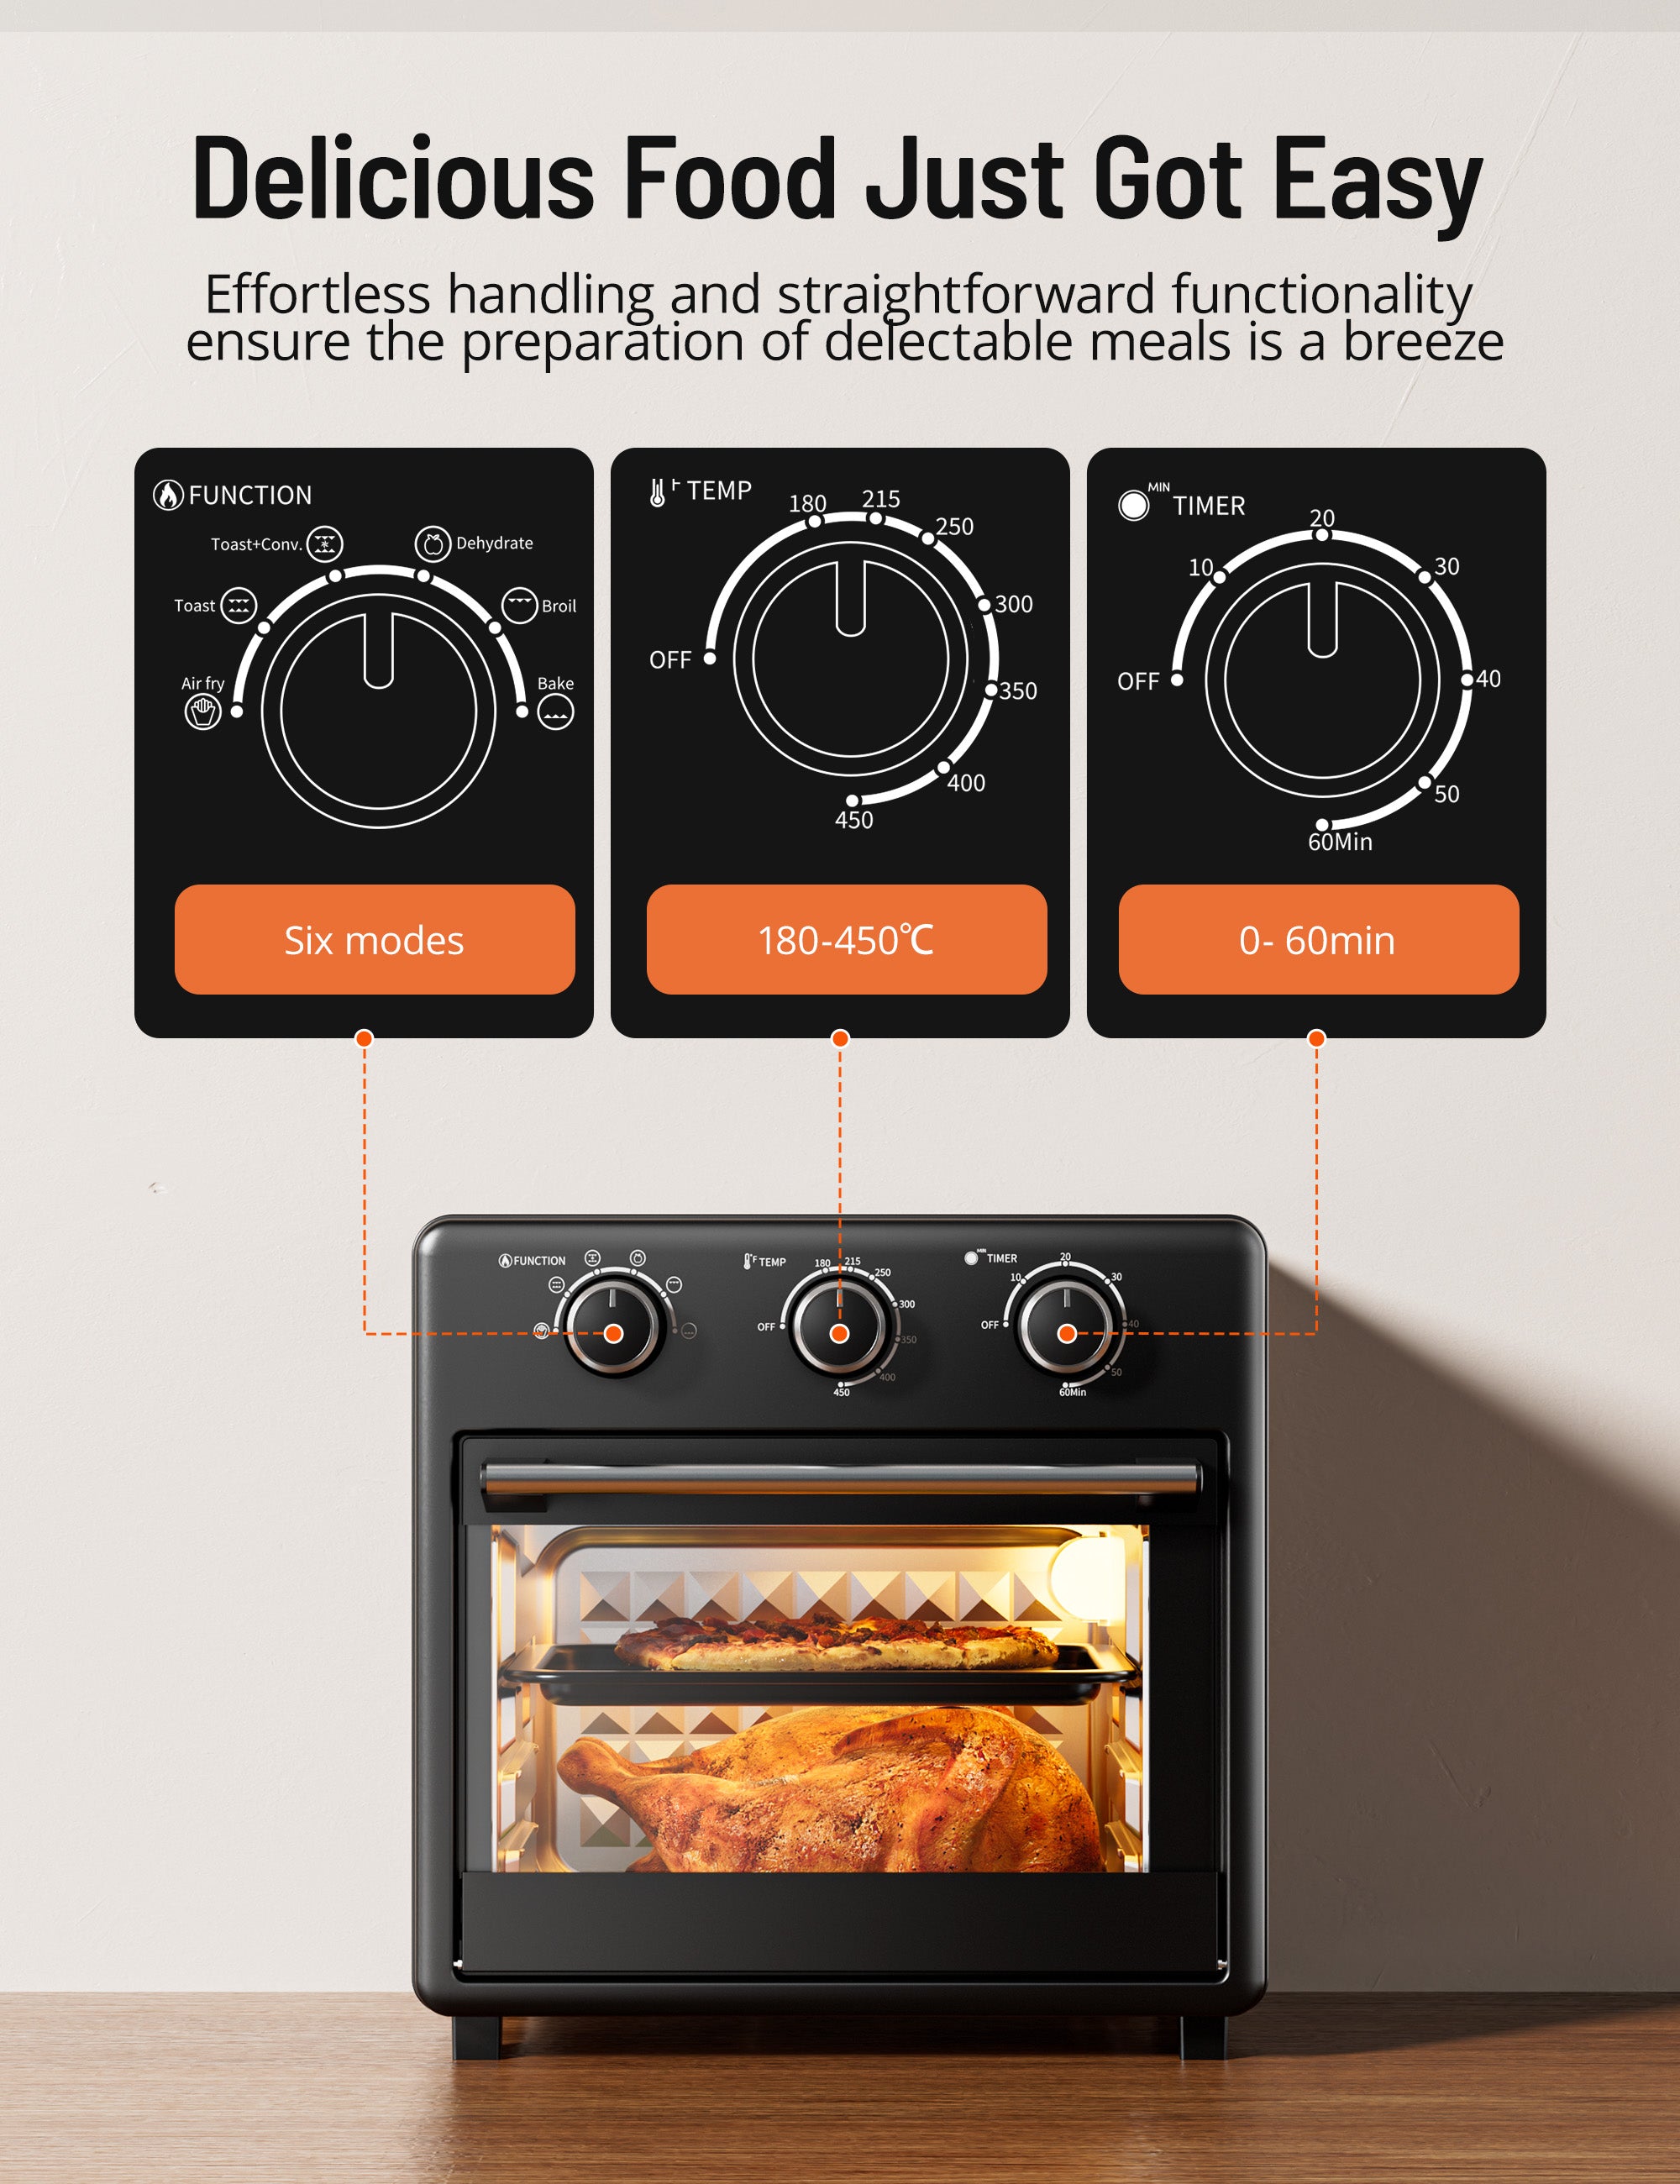 Paris Rhône Air Fryer Toaster Oven AF002，17QT Convection Oven, 11-in-1 Steam Oven, Oven Oil-less Cooker with Rotisserie Shaft